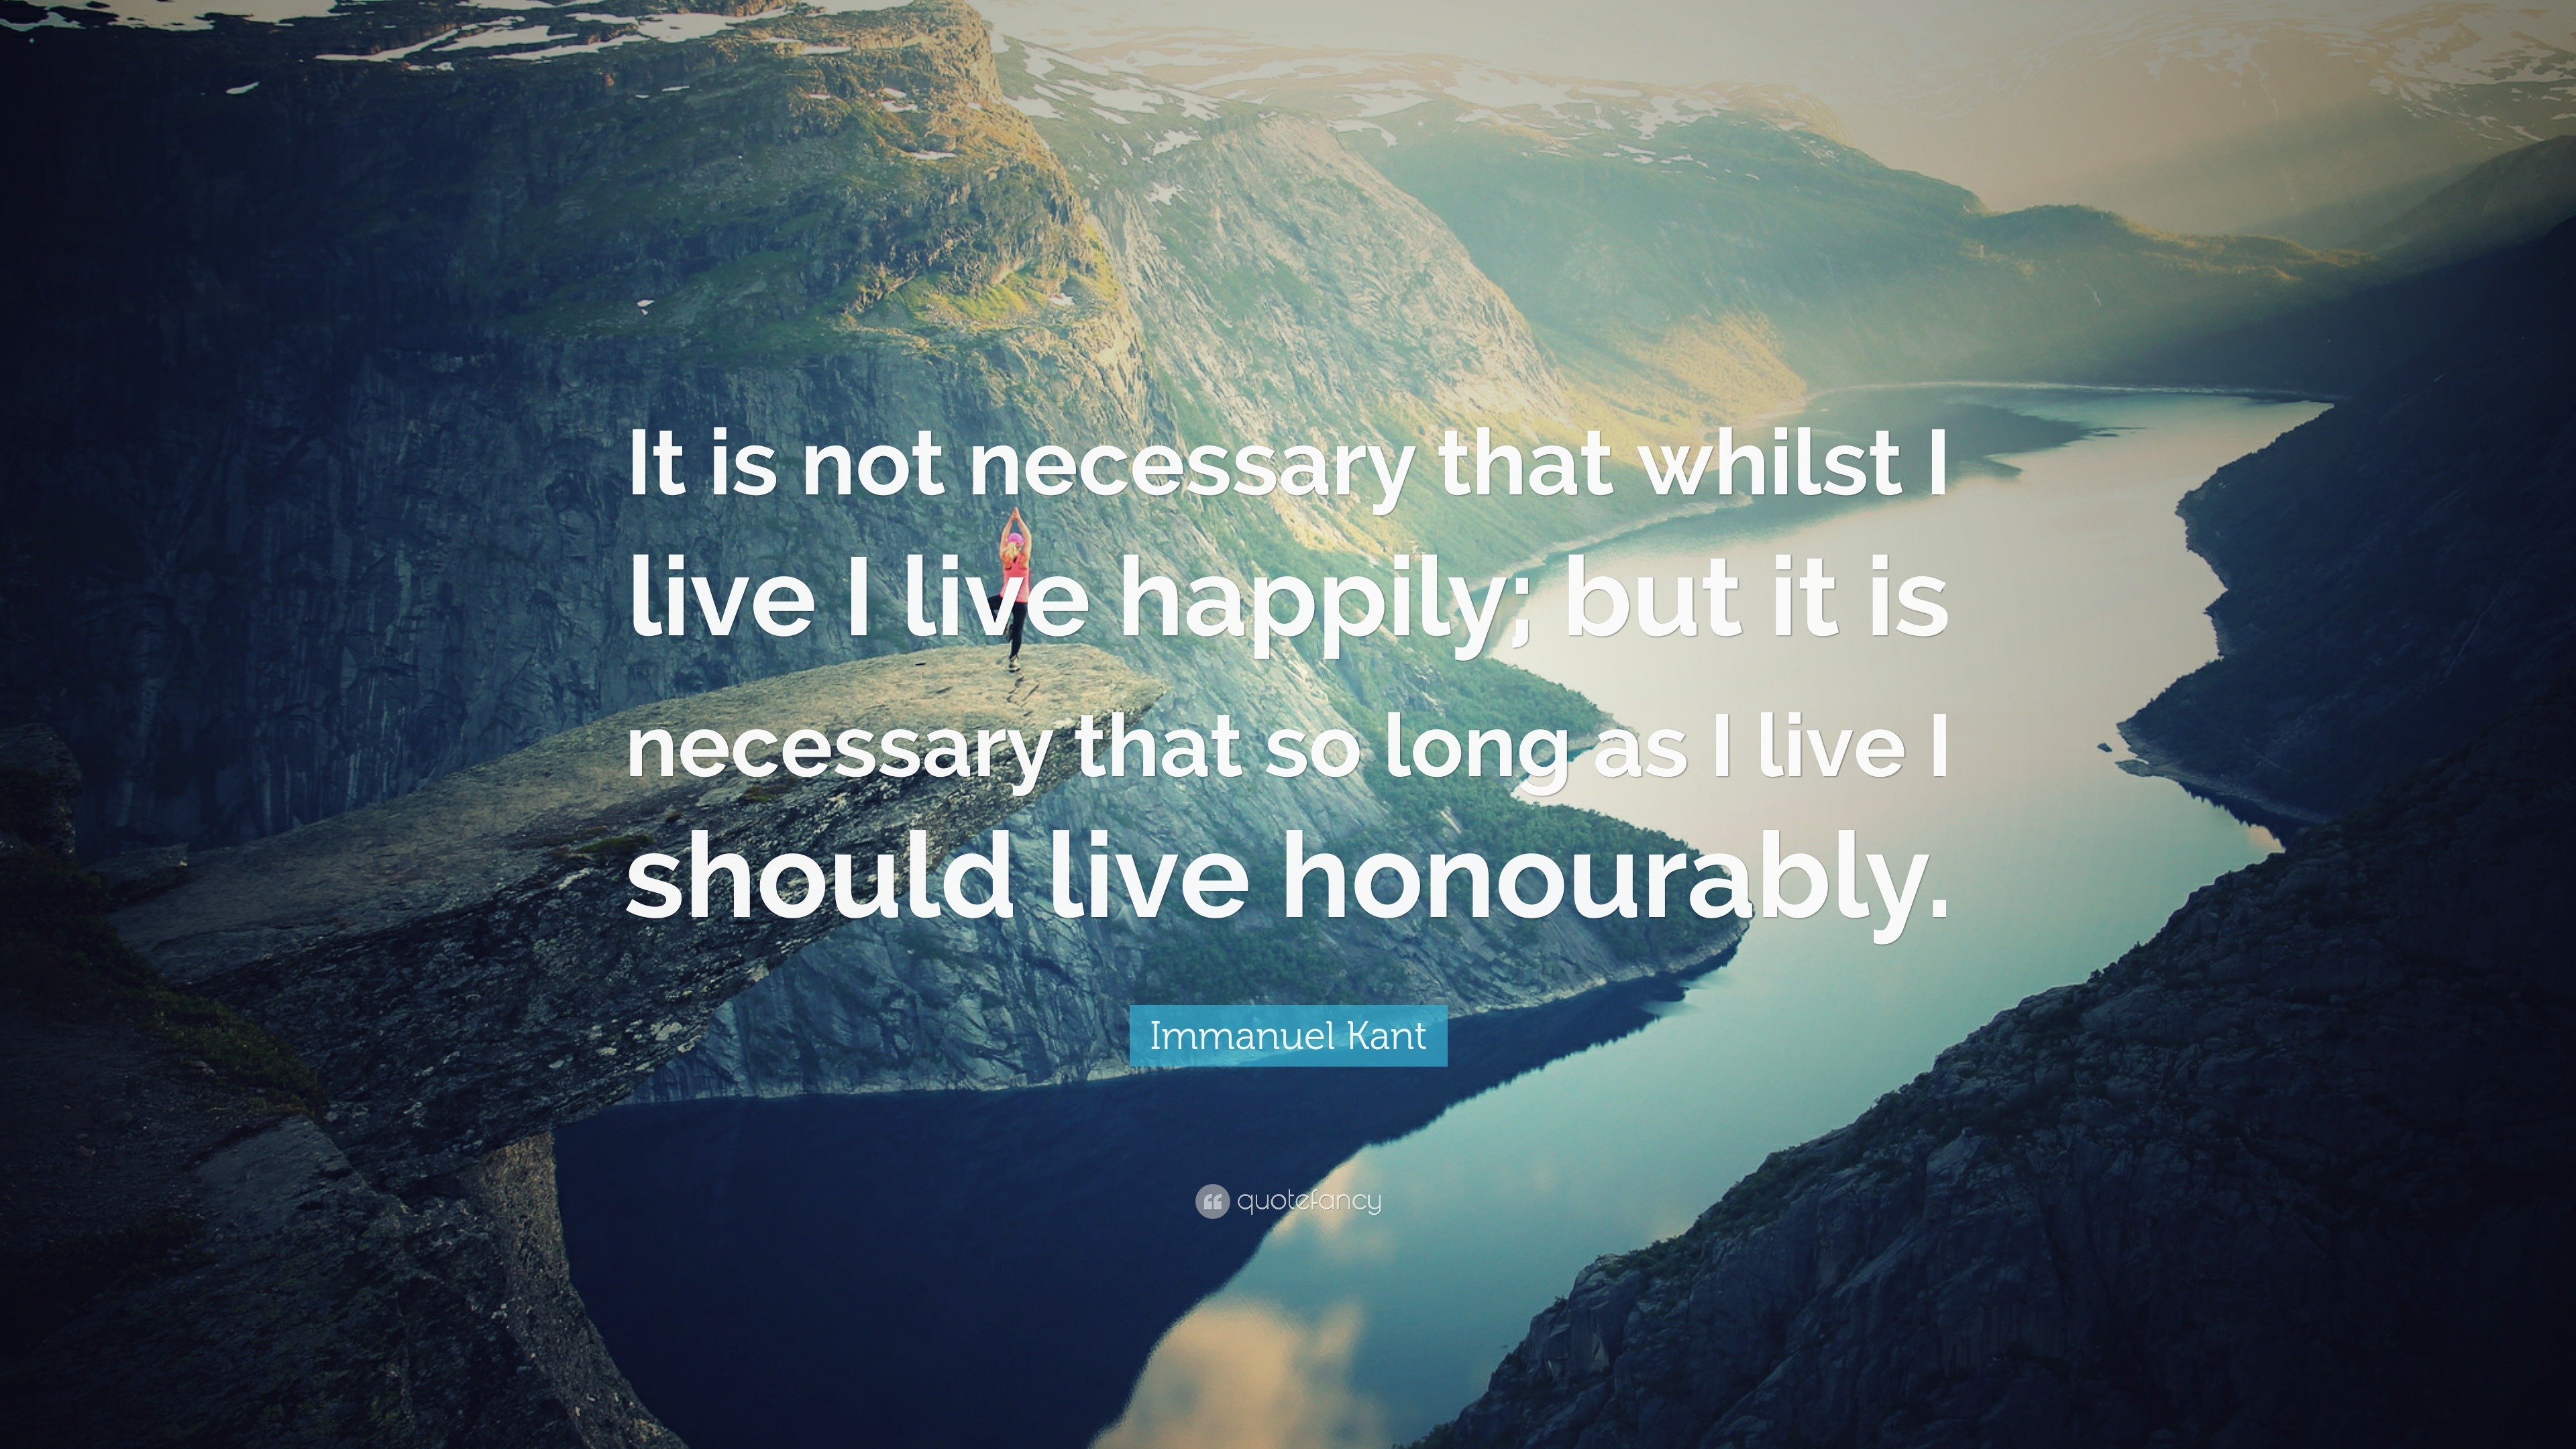 Immanuel Kant Quote: “It is not necessary that whilst I live I live happily;  but it is necessary that so long as I live I should live honourab...” (7  wallpapers) - Quotefancy